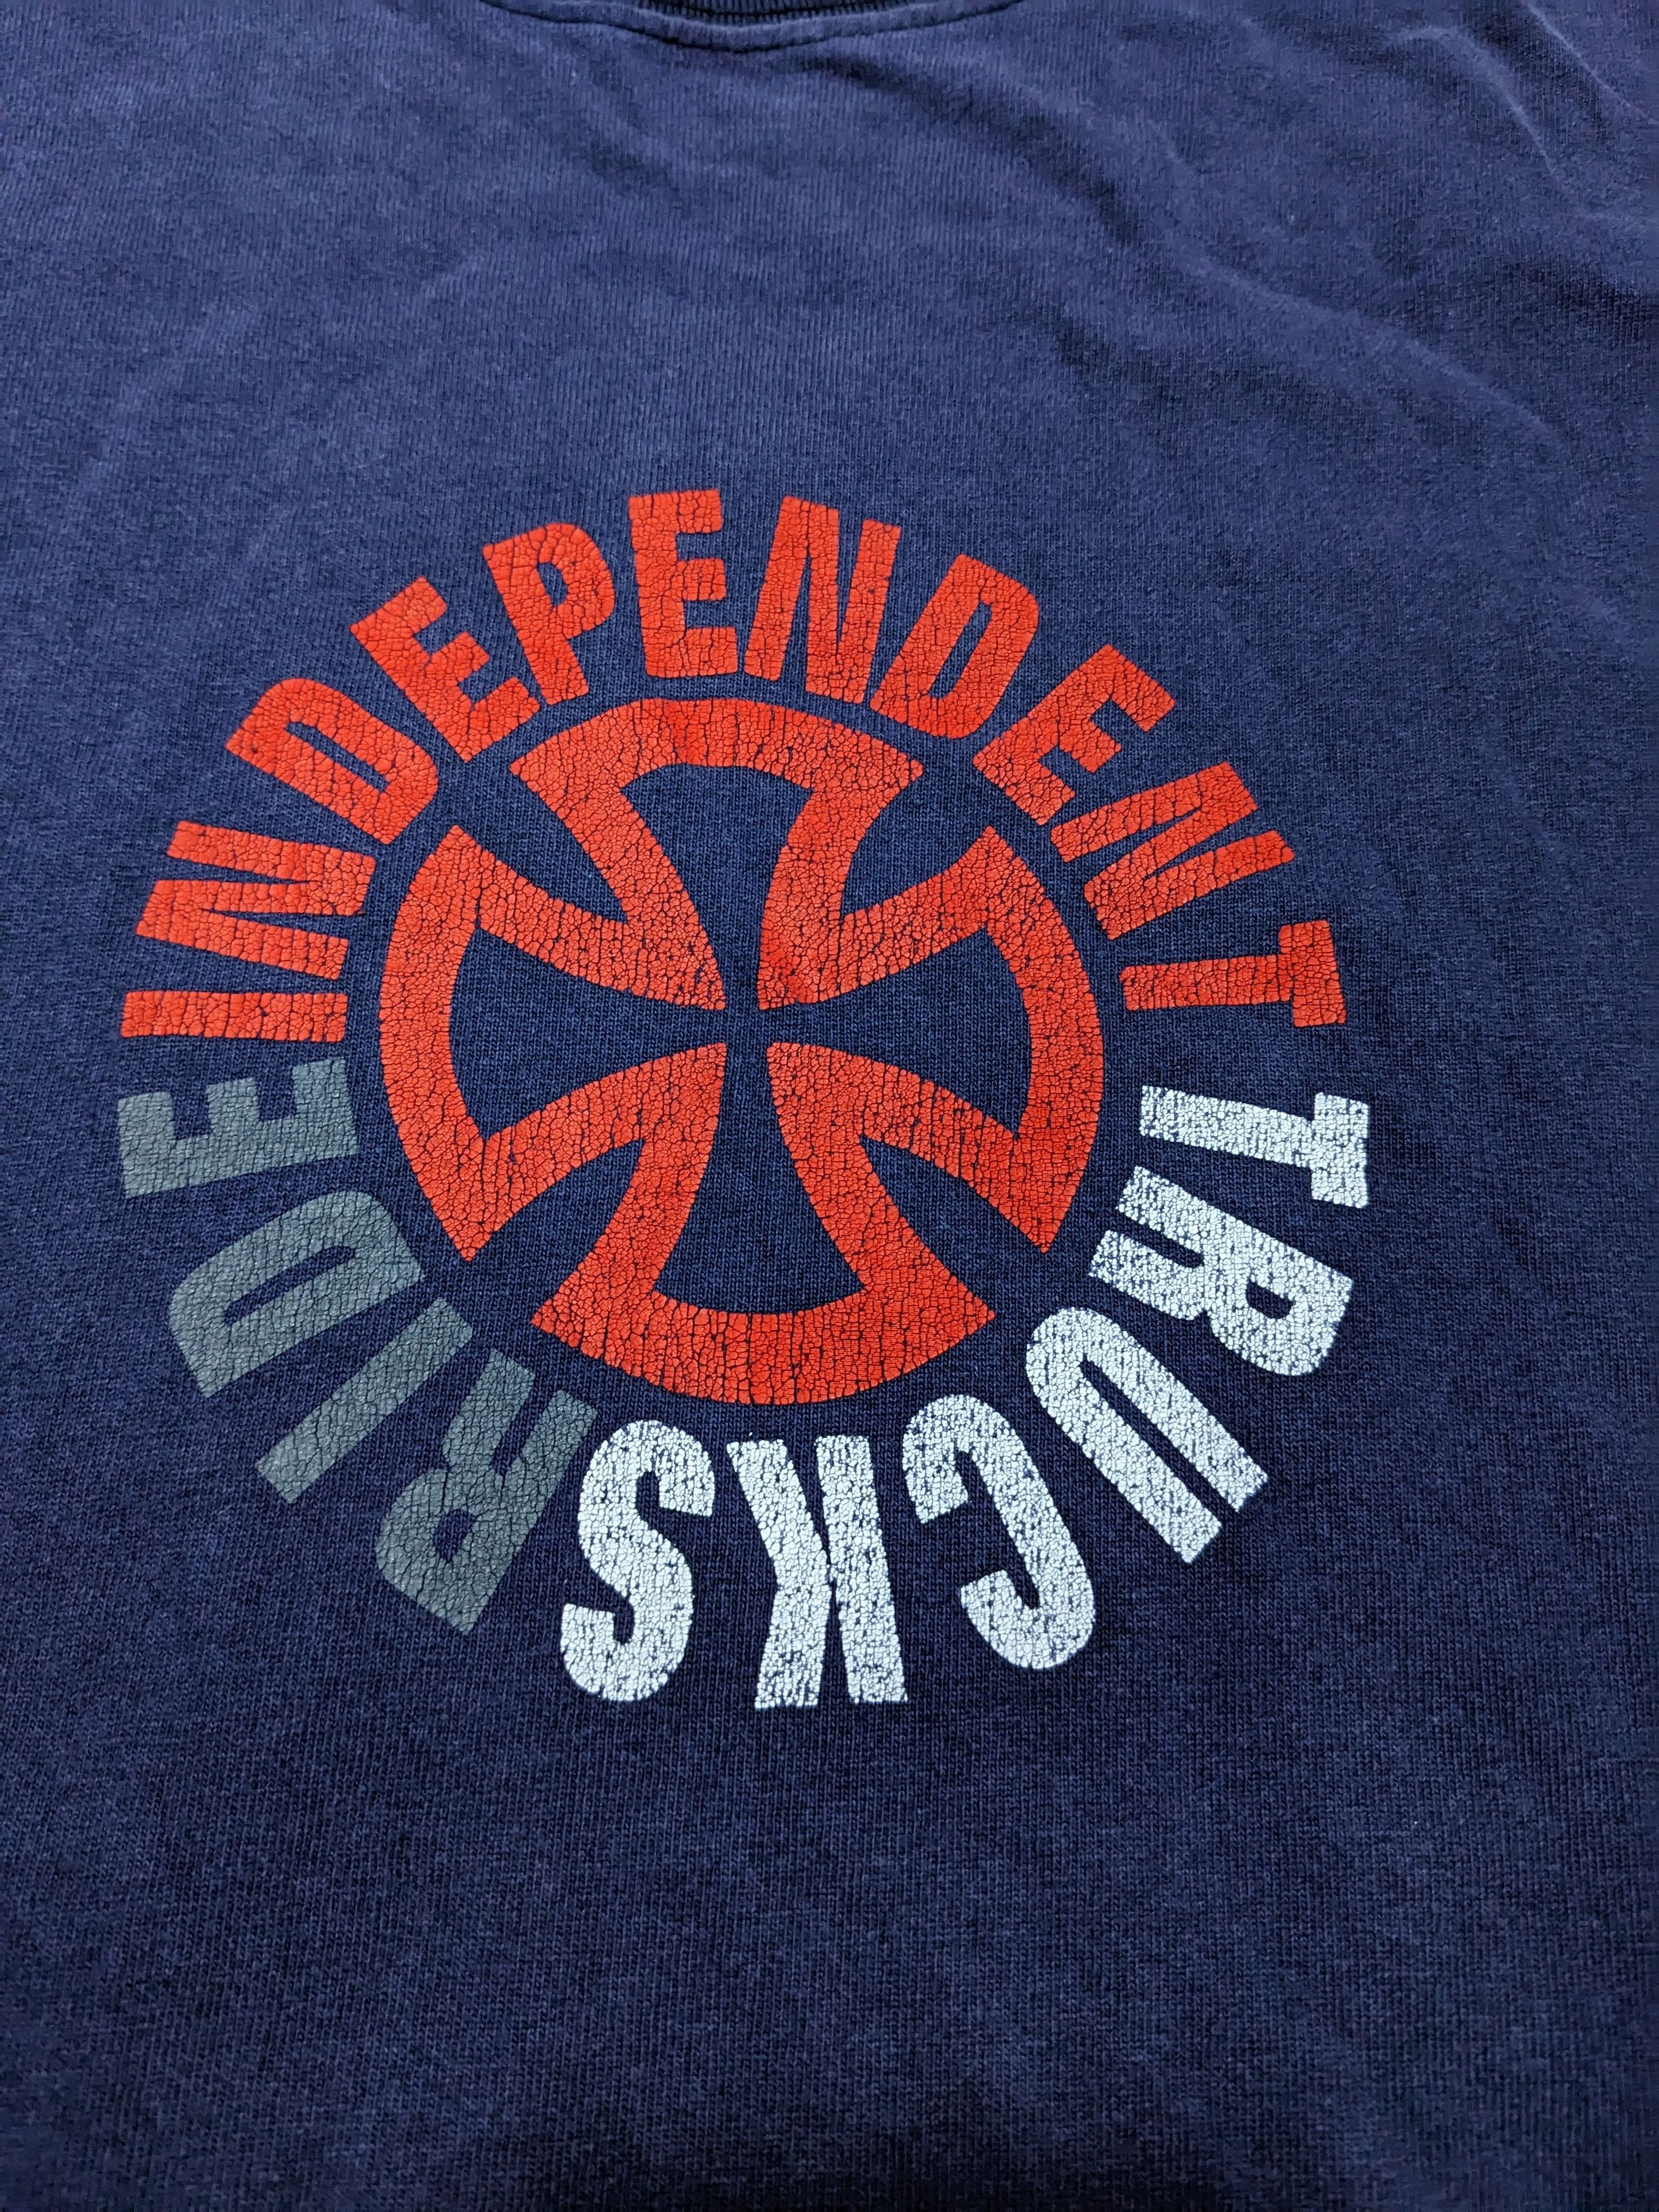 Independent Trading Co. - Independent Made In USA Big Logo Heavyweight T-Shirt - 3